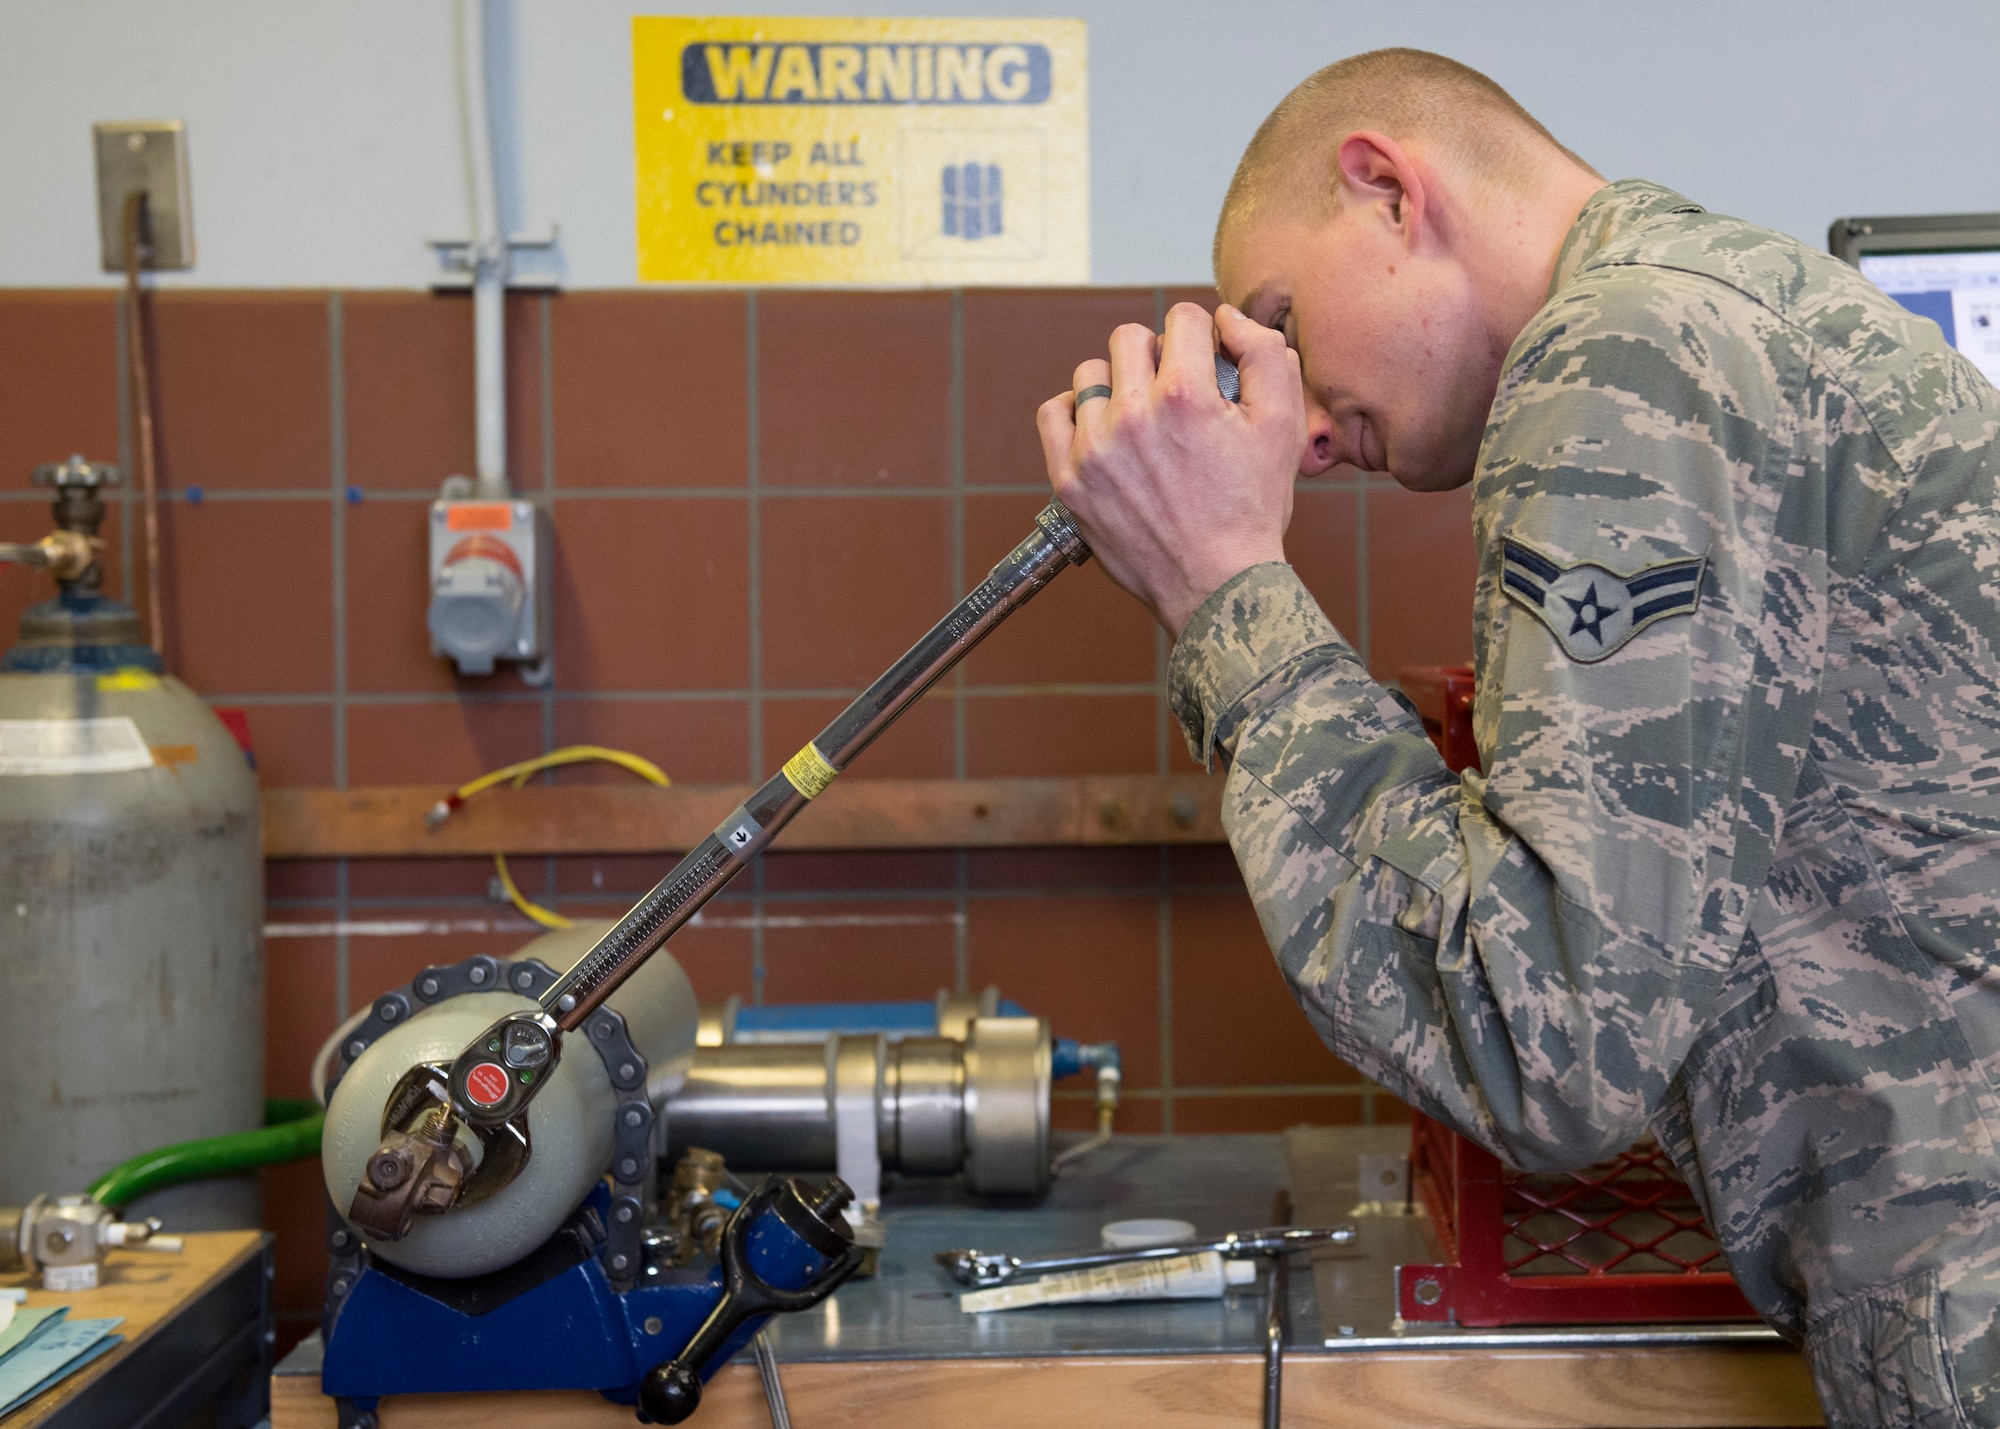 A 92nd Maintenance Squadron aircraft electrical and oxygen shop Airman displays oxygen bottle handling procedures during an annual health risk assessment at Fairchild Air Force Base, Washington, Feb. 3, 2020. Safety may always be an Air Force priority, but accidents may still occur, as there are some tasks that have a higher degree of injury risk no matter how well you prepare or try to make safe. (U.S. Air Force photo by Staff Sgt. Ryan Lackey)